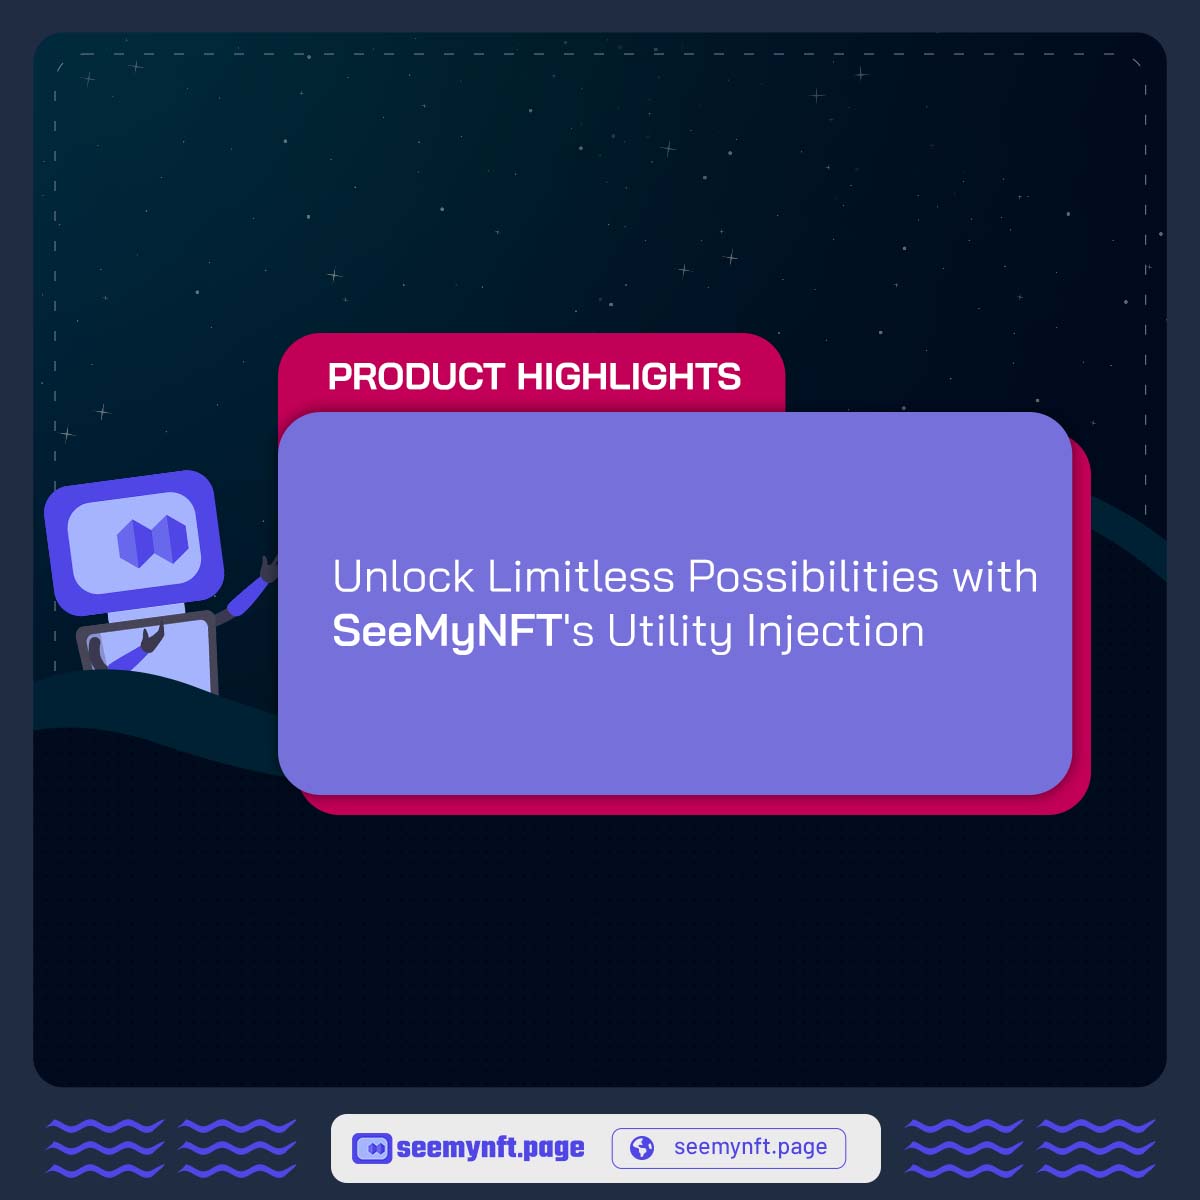 🔓 Unleash Limitless Potential with SeeMyNFT's Utility Injection! 💎✨Discover a new dimension of NFTs on SeemyNFT.page. Beyond uniqueness, we prioritize utility, making NFTs powerful assets with exclusive privileges. #SeemyNFT #NFTRevolution #UnlockThePossibilities